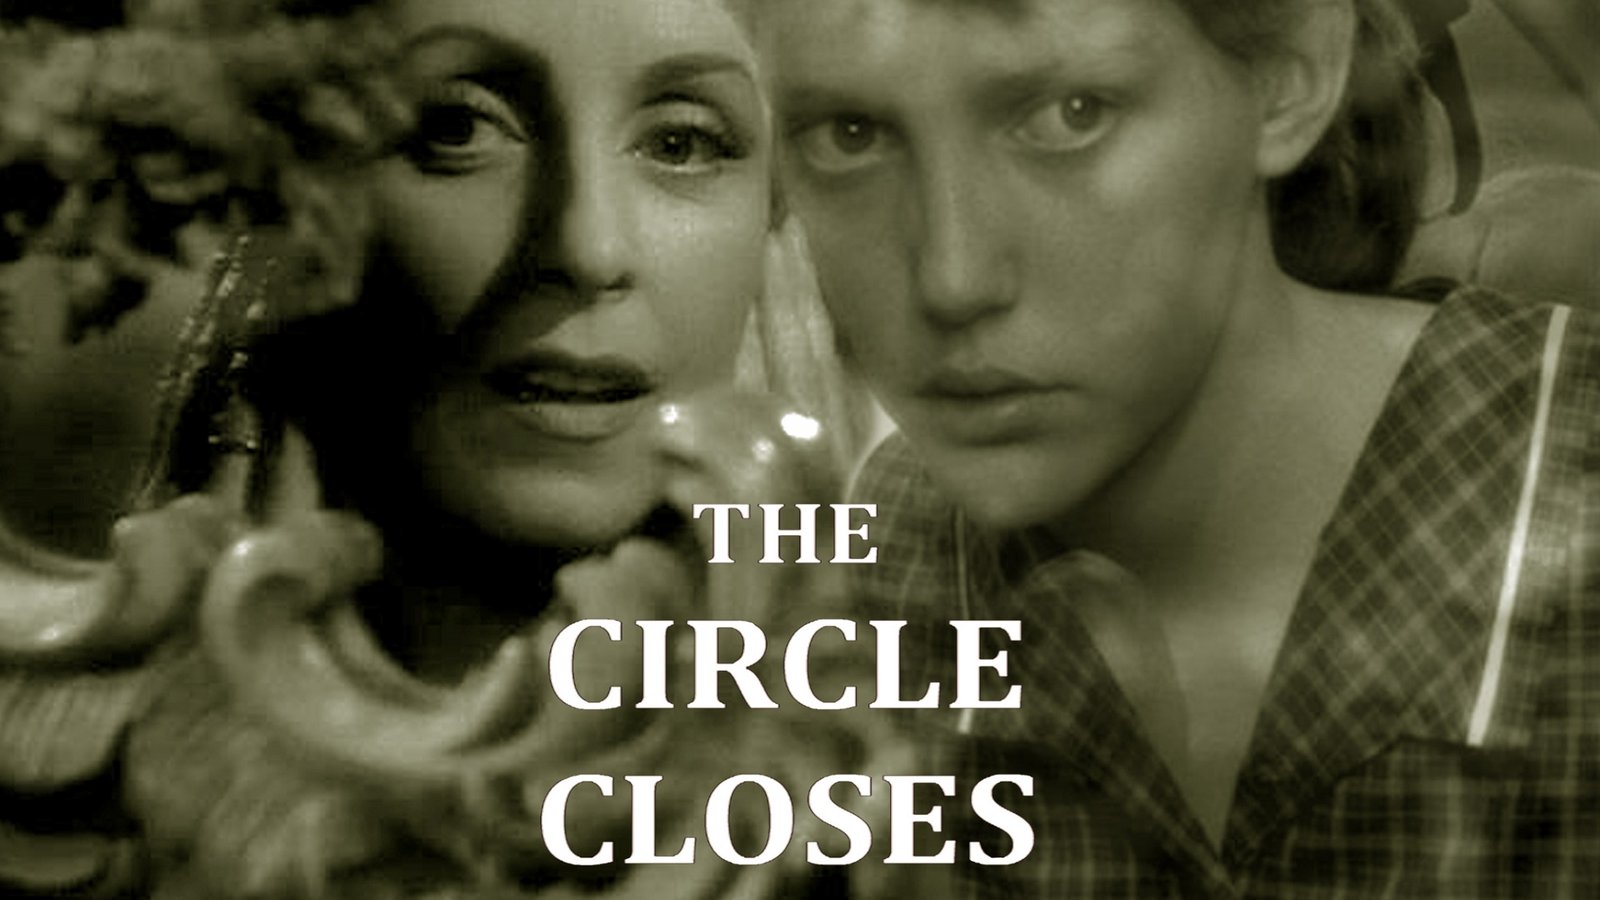 The Circle Closes - An Examination of the Use of Props in Four Classic Films